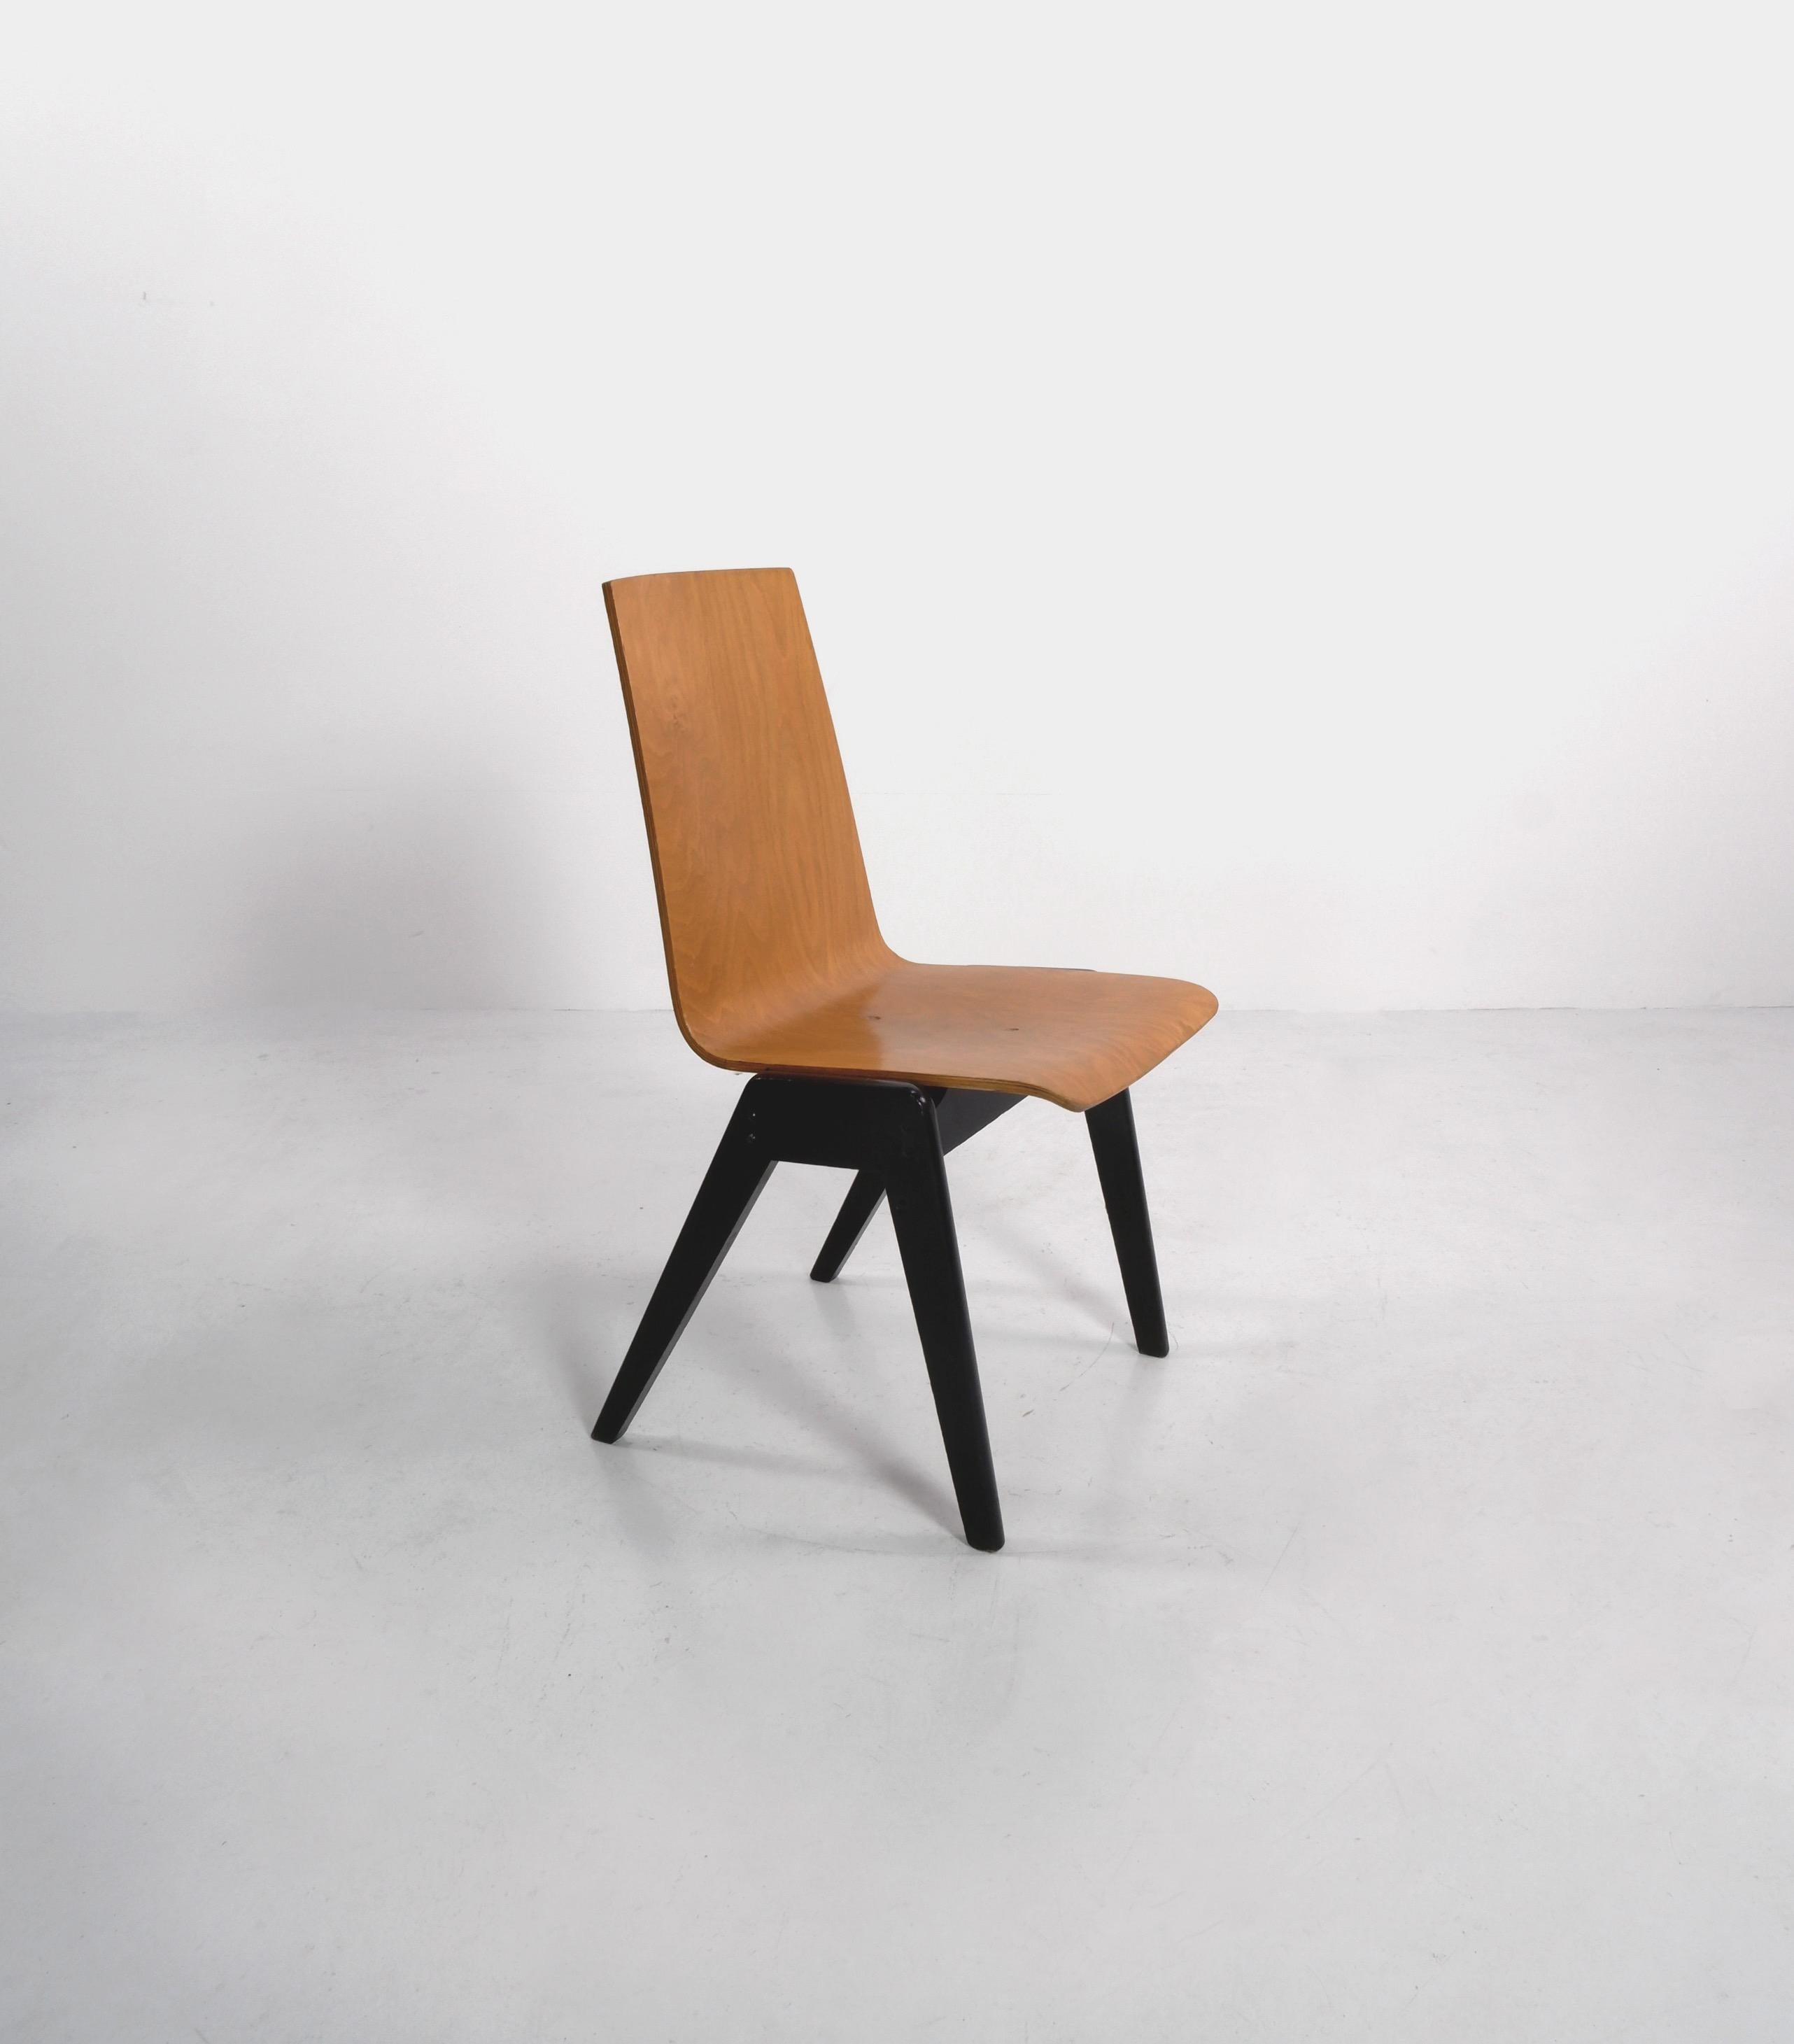 Plywood stacking chairs attributed to Austrian architect Roland Rainer. 

There are 7 chairs available, price is per chair. 

Dimensions (cm, approx): 
Height: 87
Width: 48
Depth: 55.